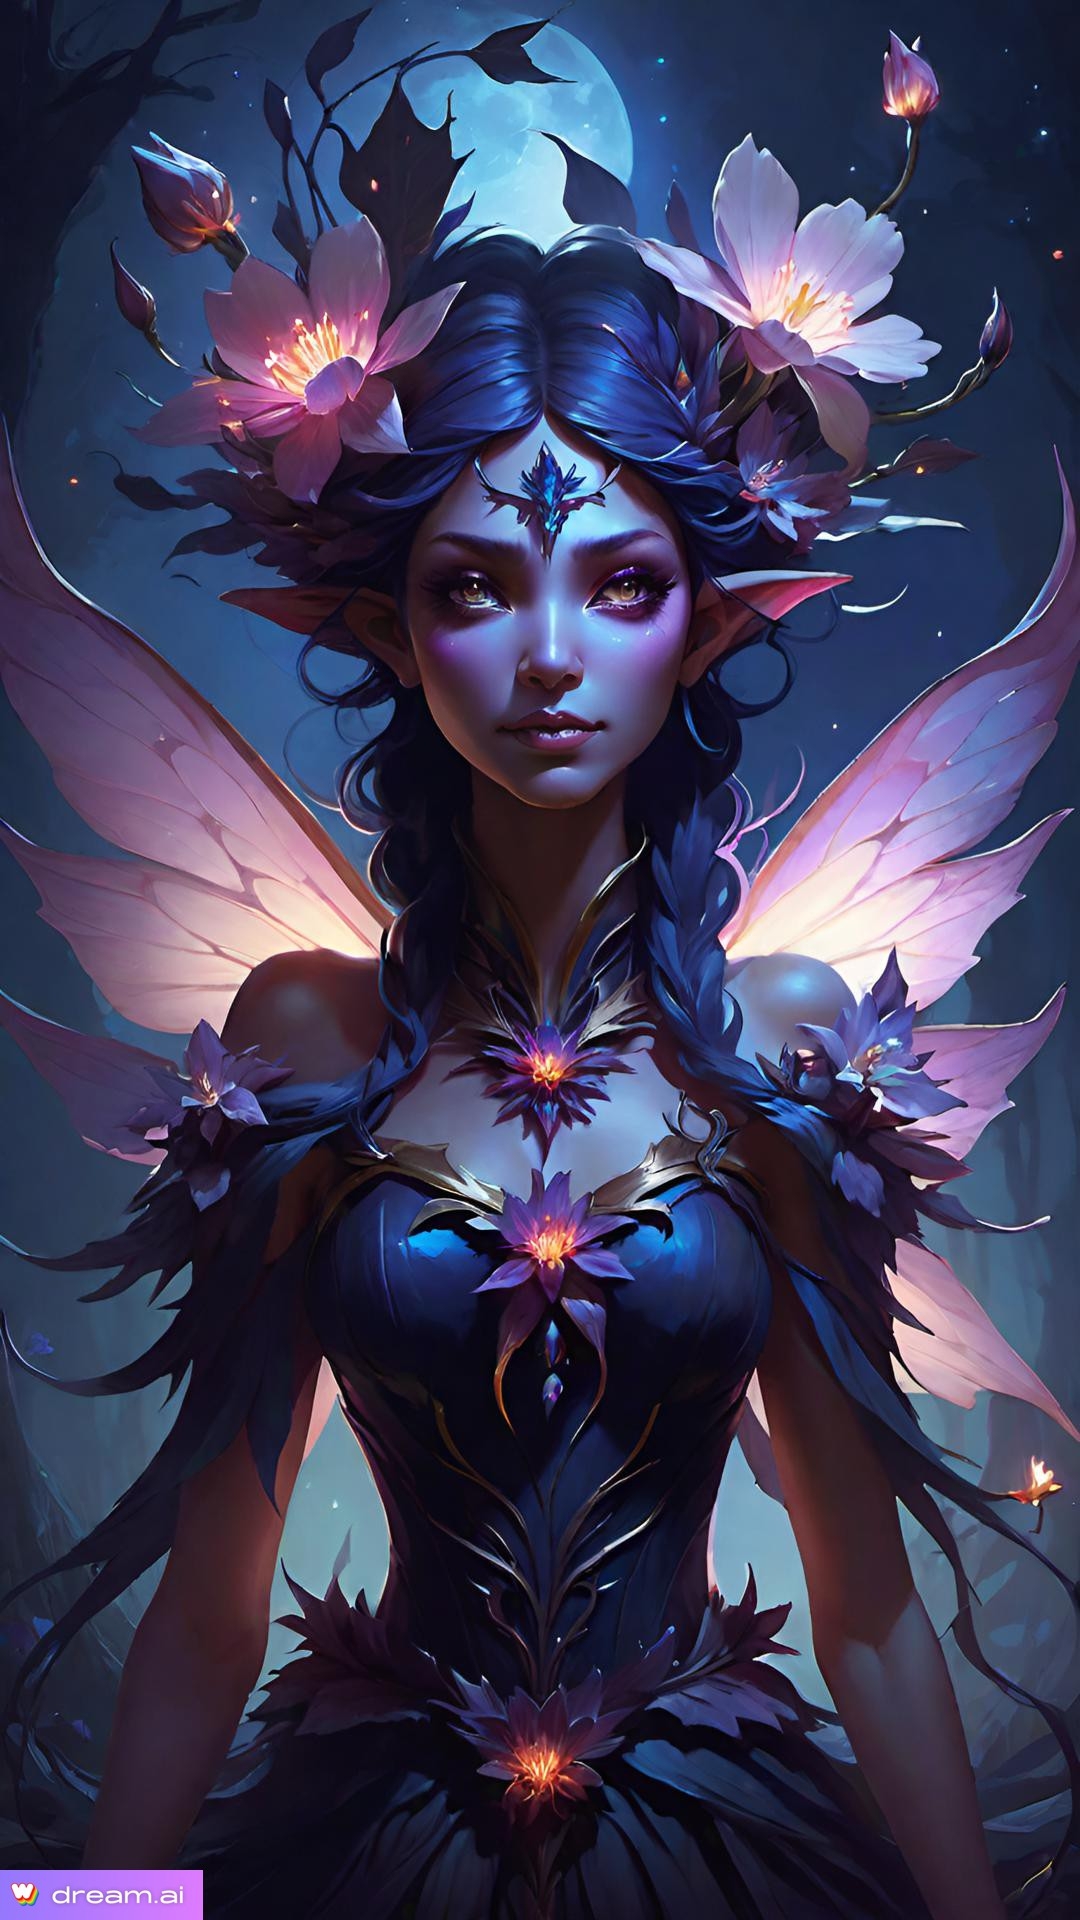 a digital art of a woman with purple hair and wings